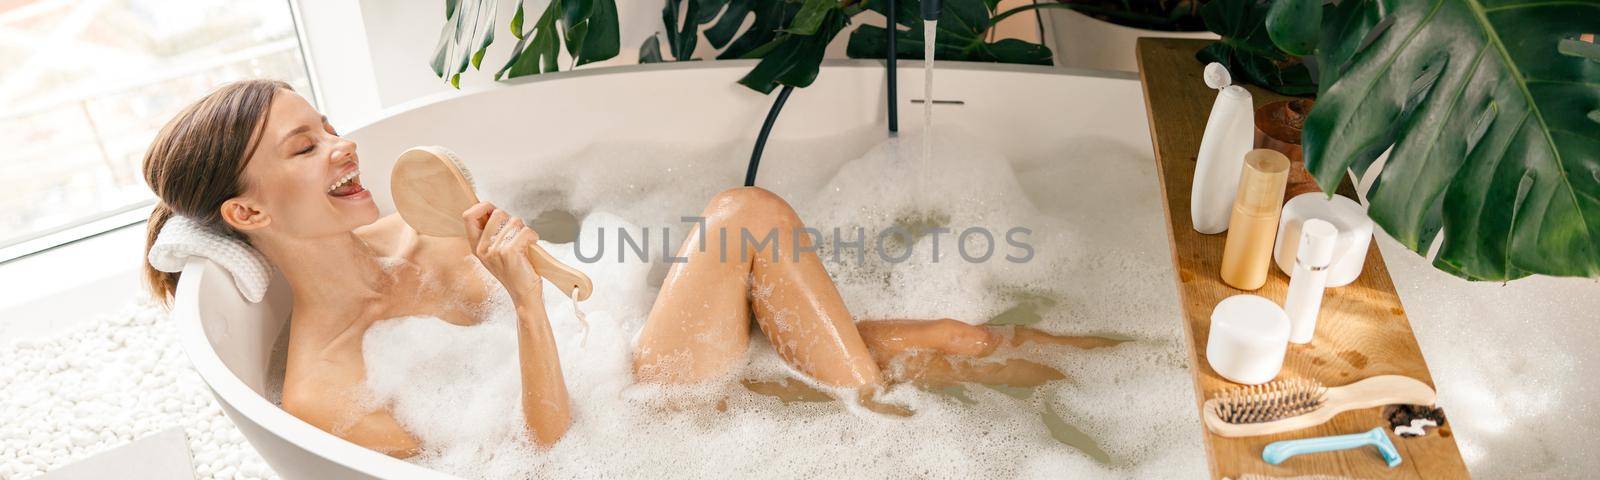 Beautiful young woman having fun, singing while relaxing in bathtub at luxury spa resort. Wellness, body care concept